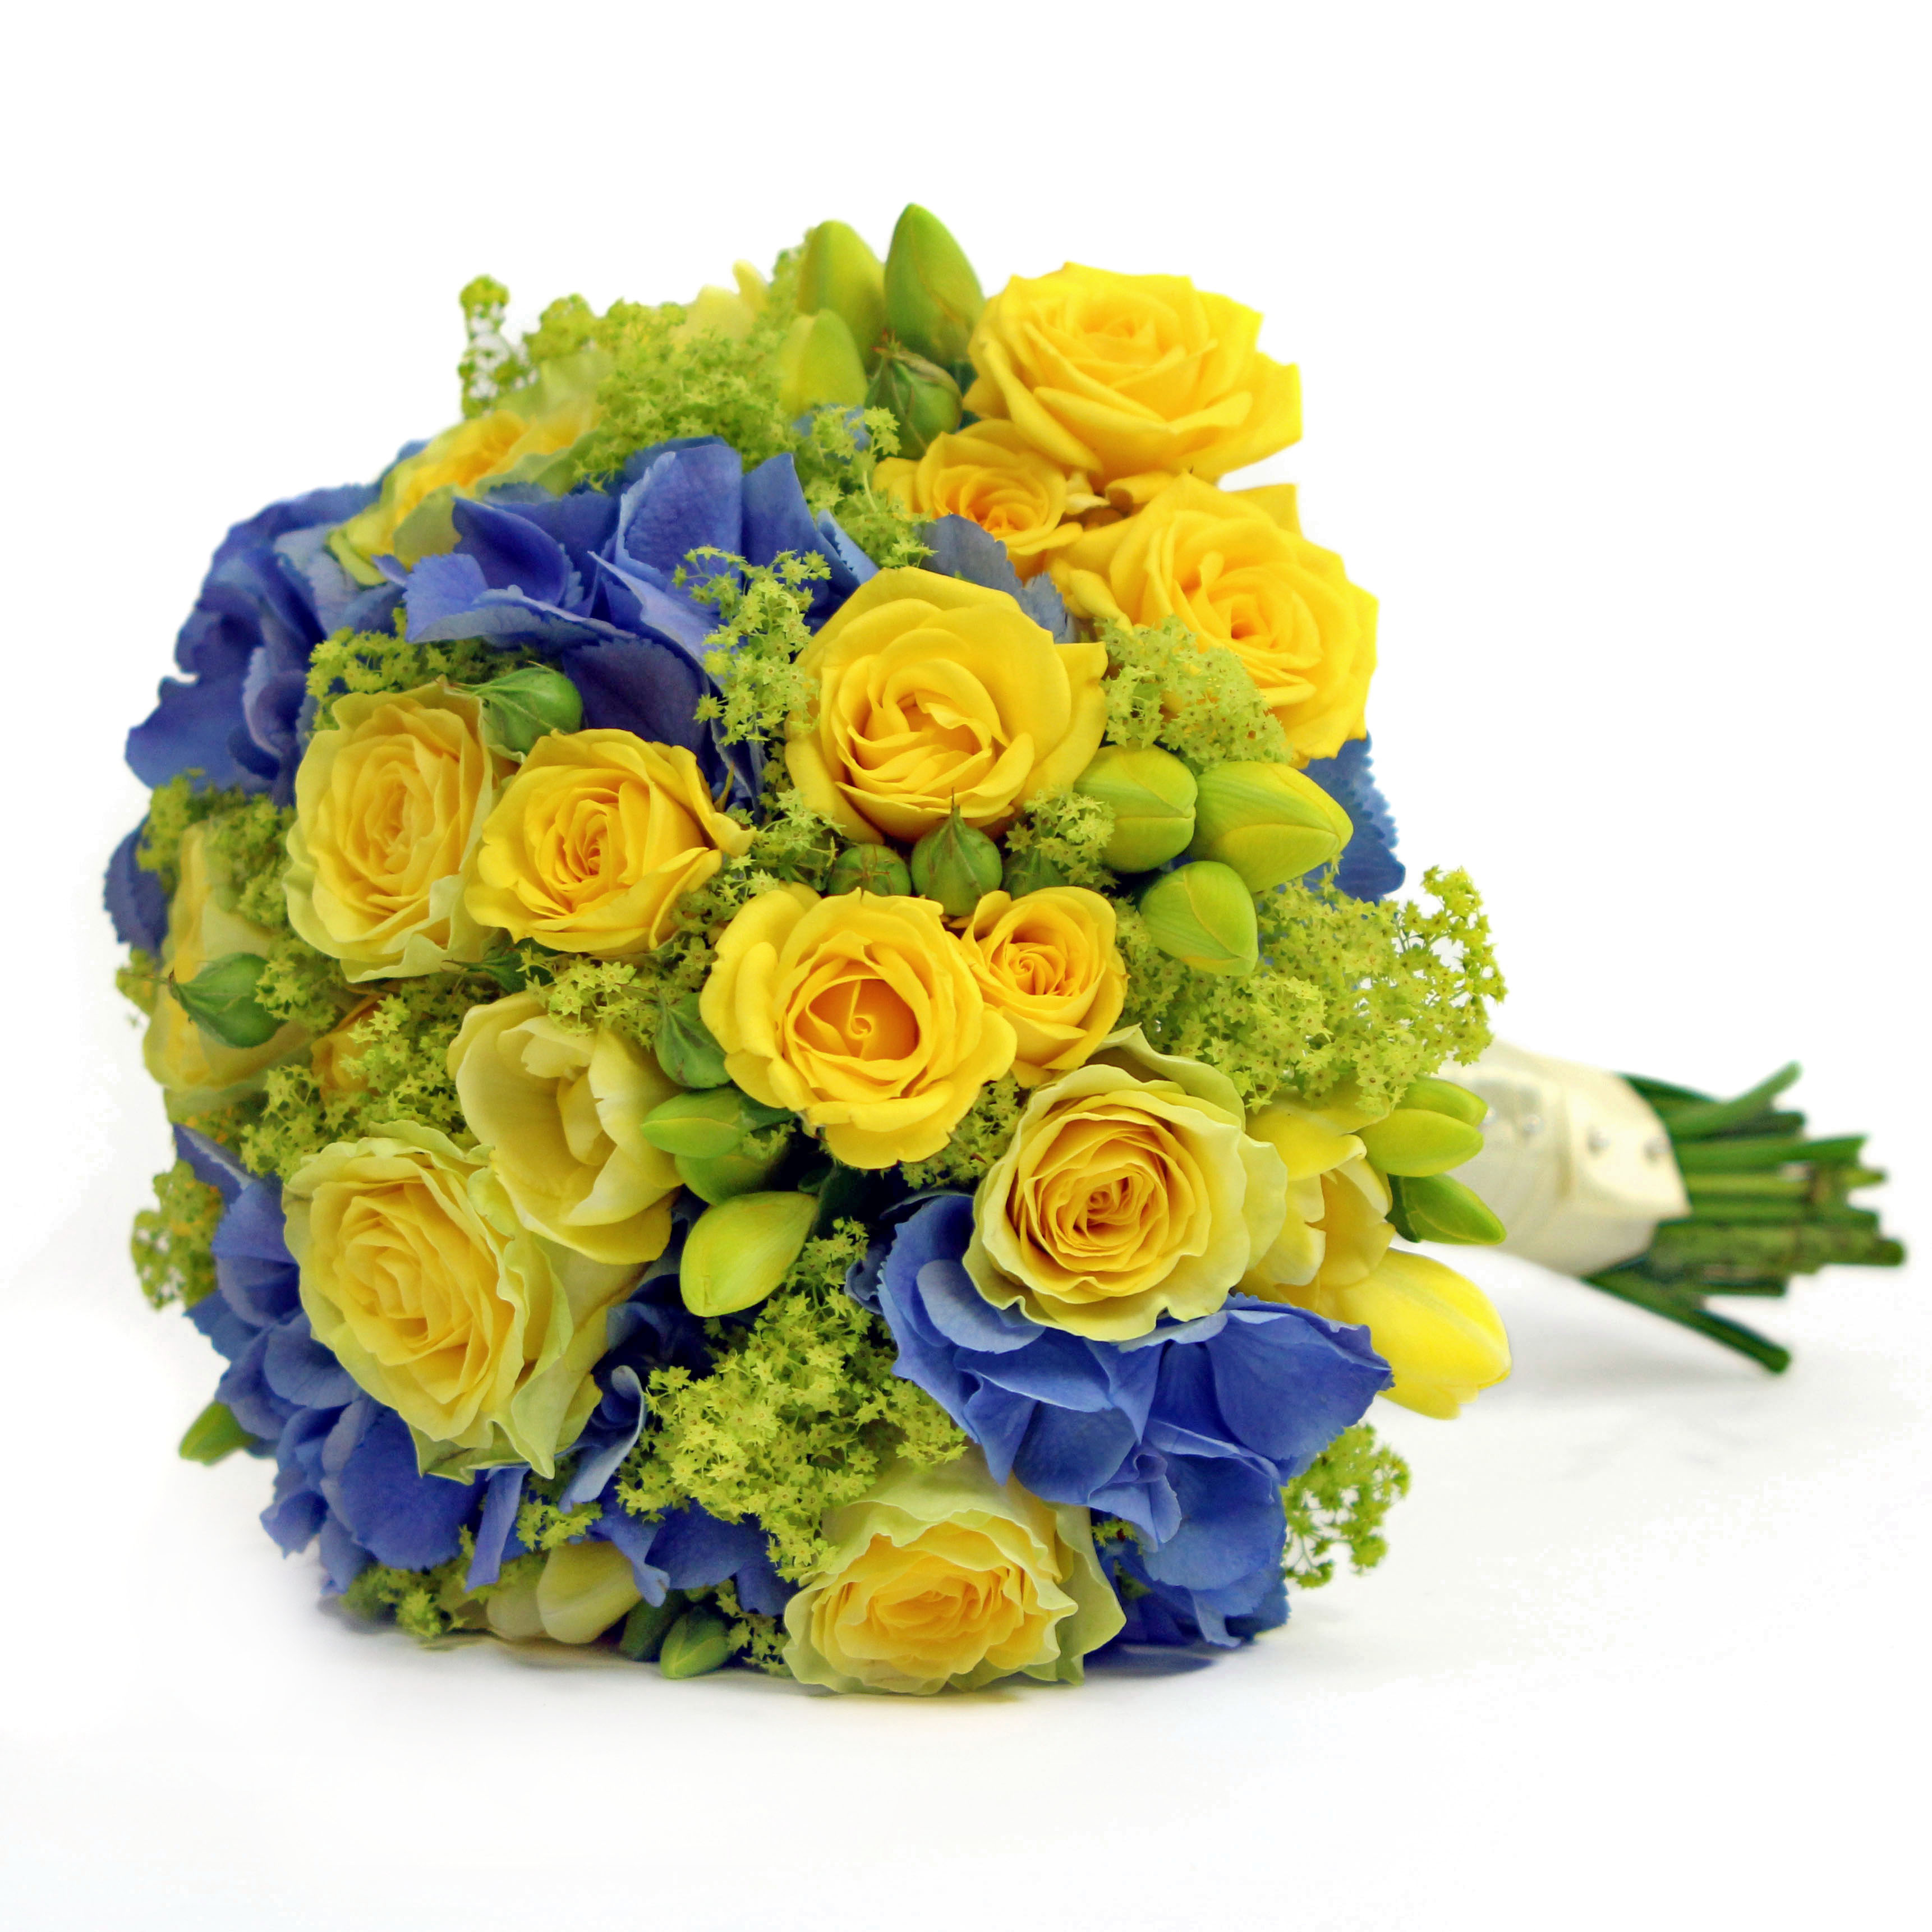 Sweetly scented spring bouquets from Flowers24Hours flower ...
